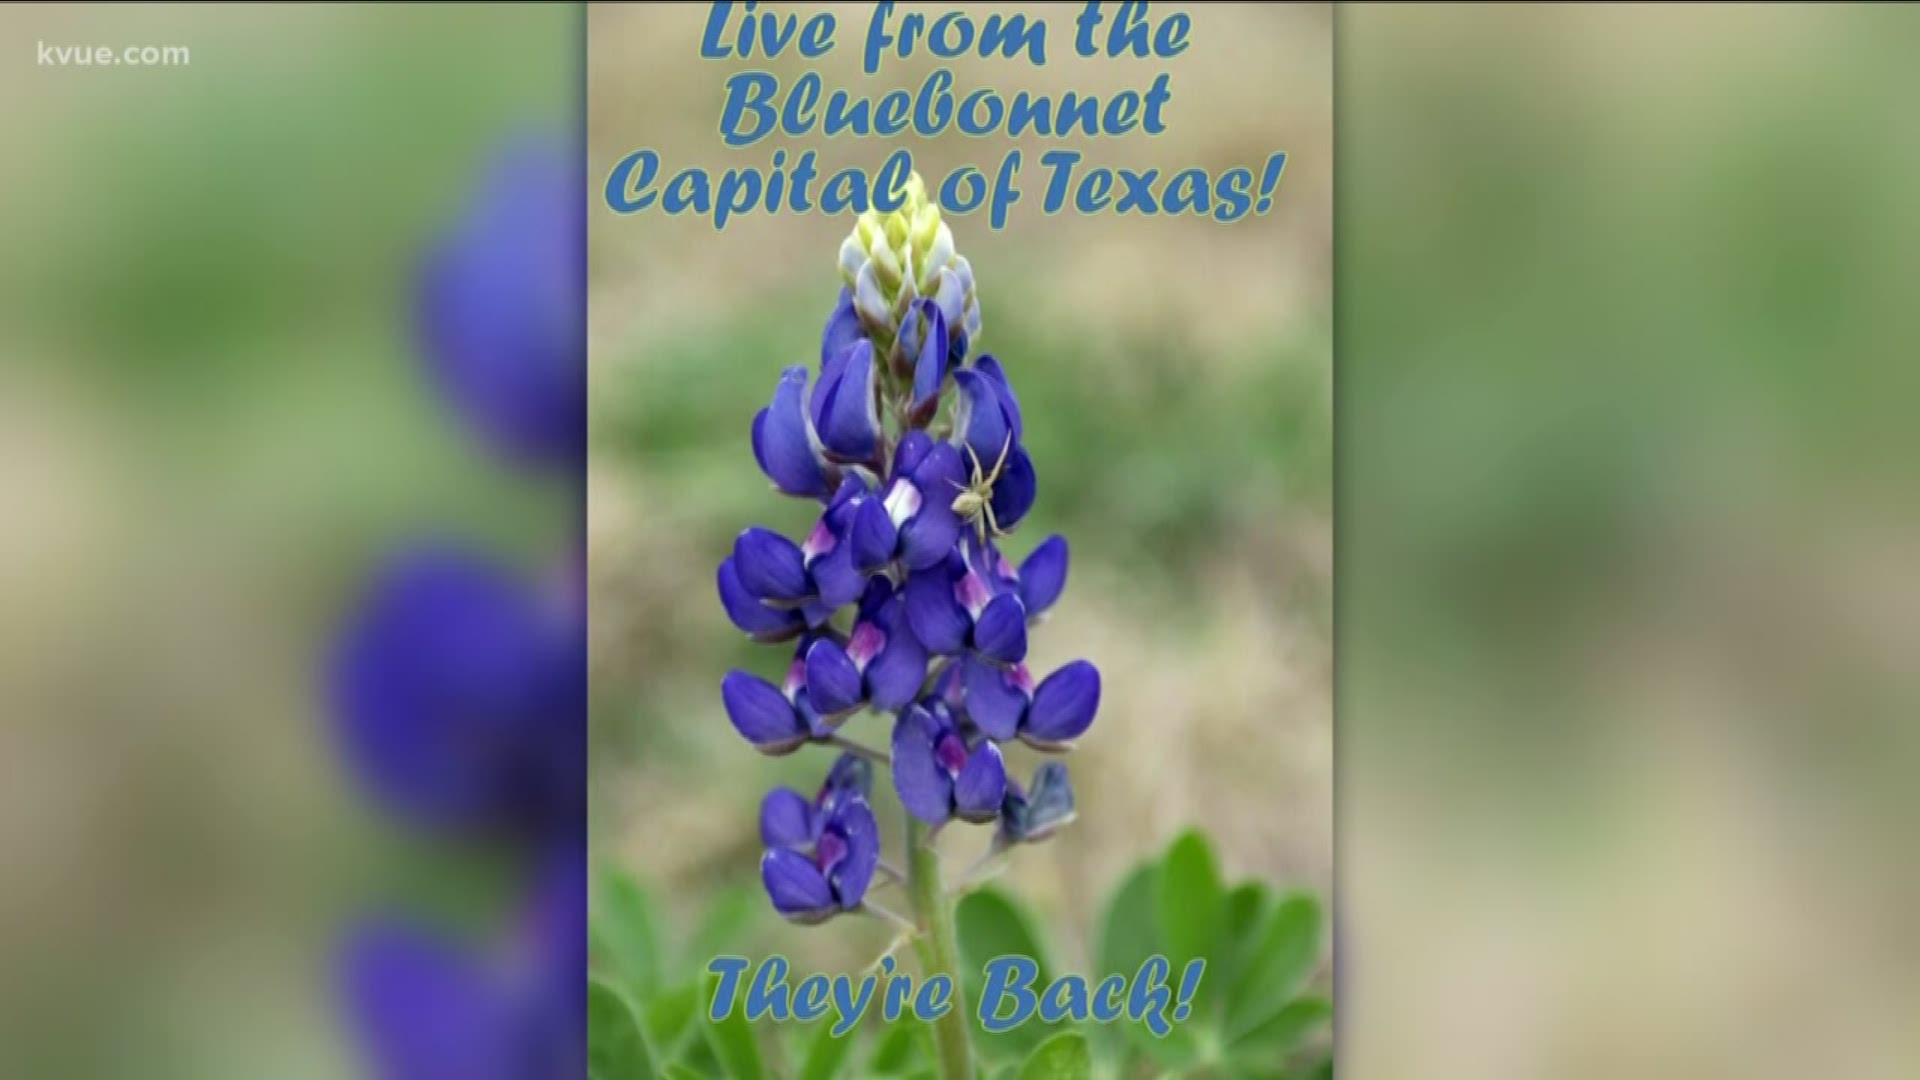 Get your cameras ready, Central Texas! The Llano County Chamber of Commerce shared a photo, saying people are seeing their first bluebonnets of the season.